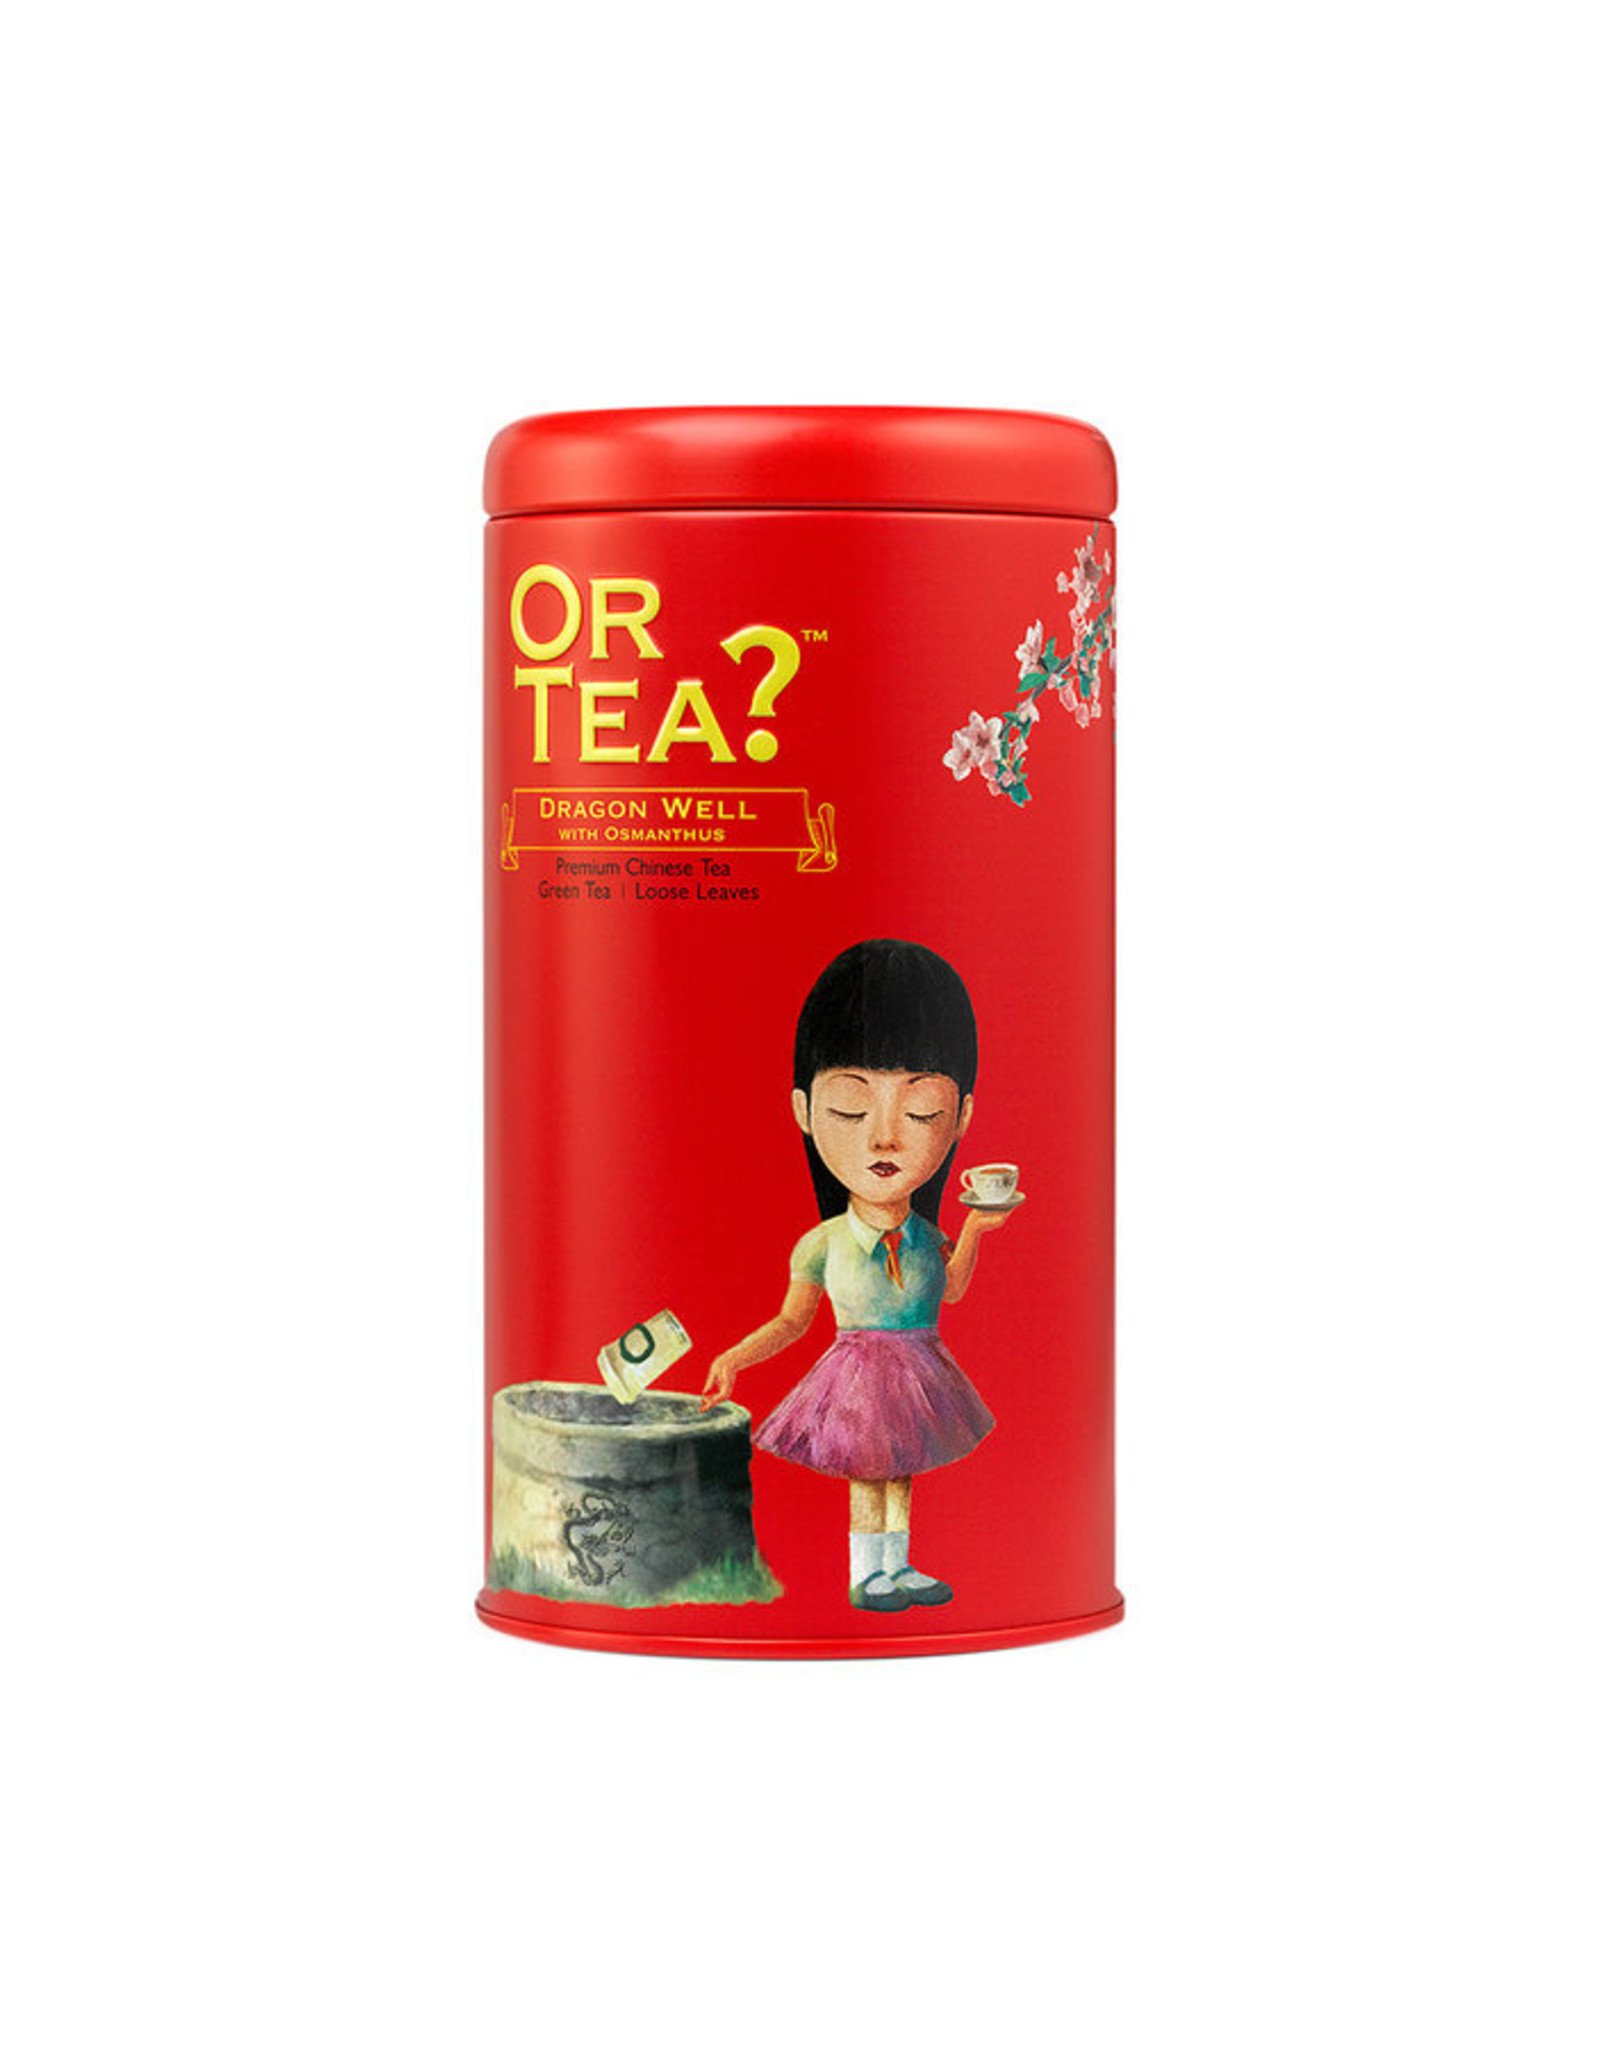 Or Tea? Dragon Well with Osmanthus - Tin Canister